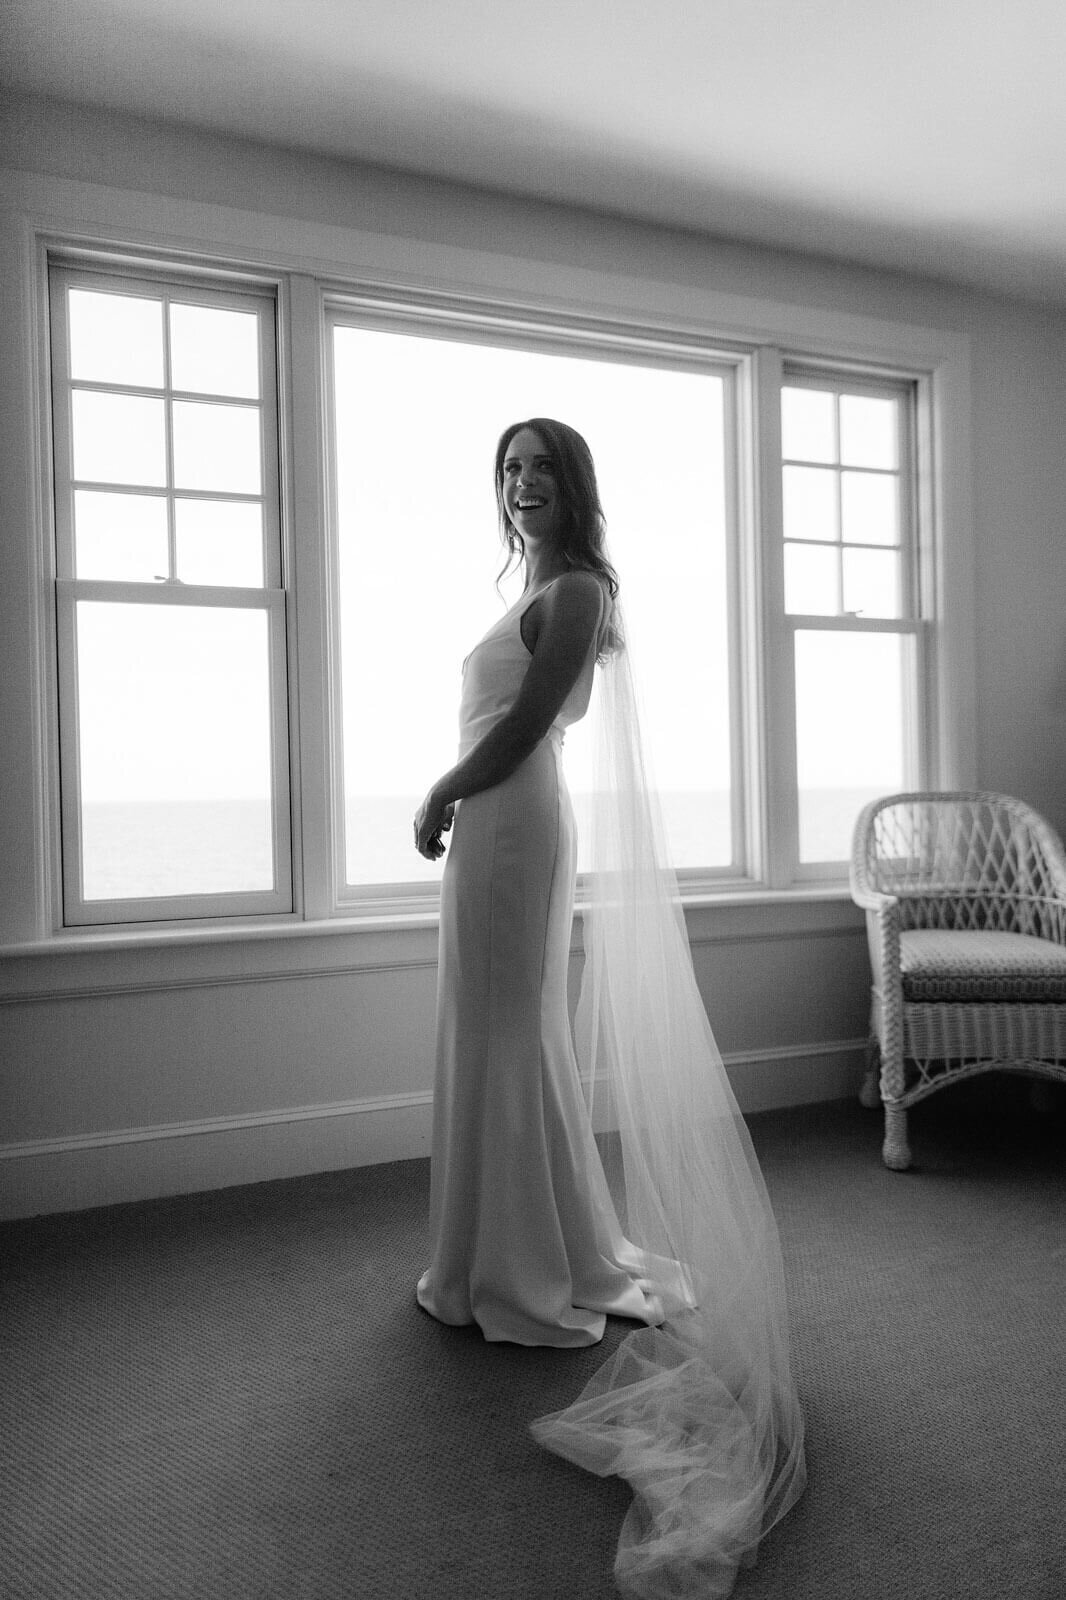 The bride is standing inside a room at Wianno Club, Cape Cod, MA.